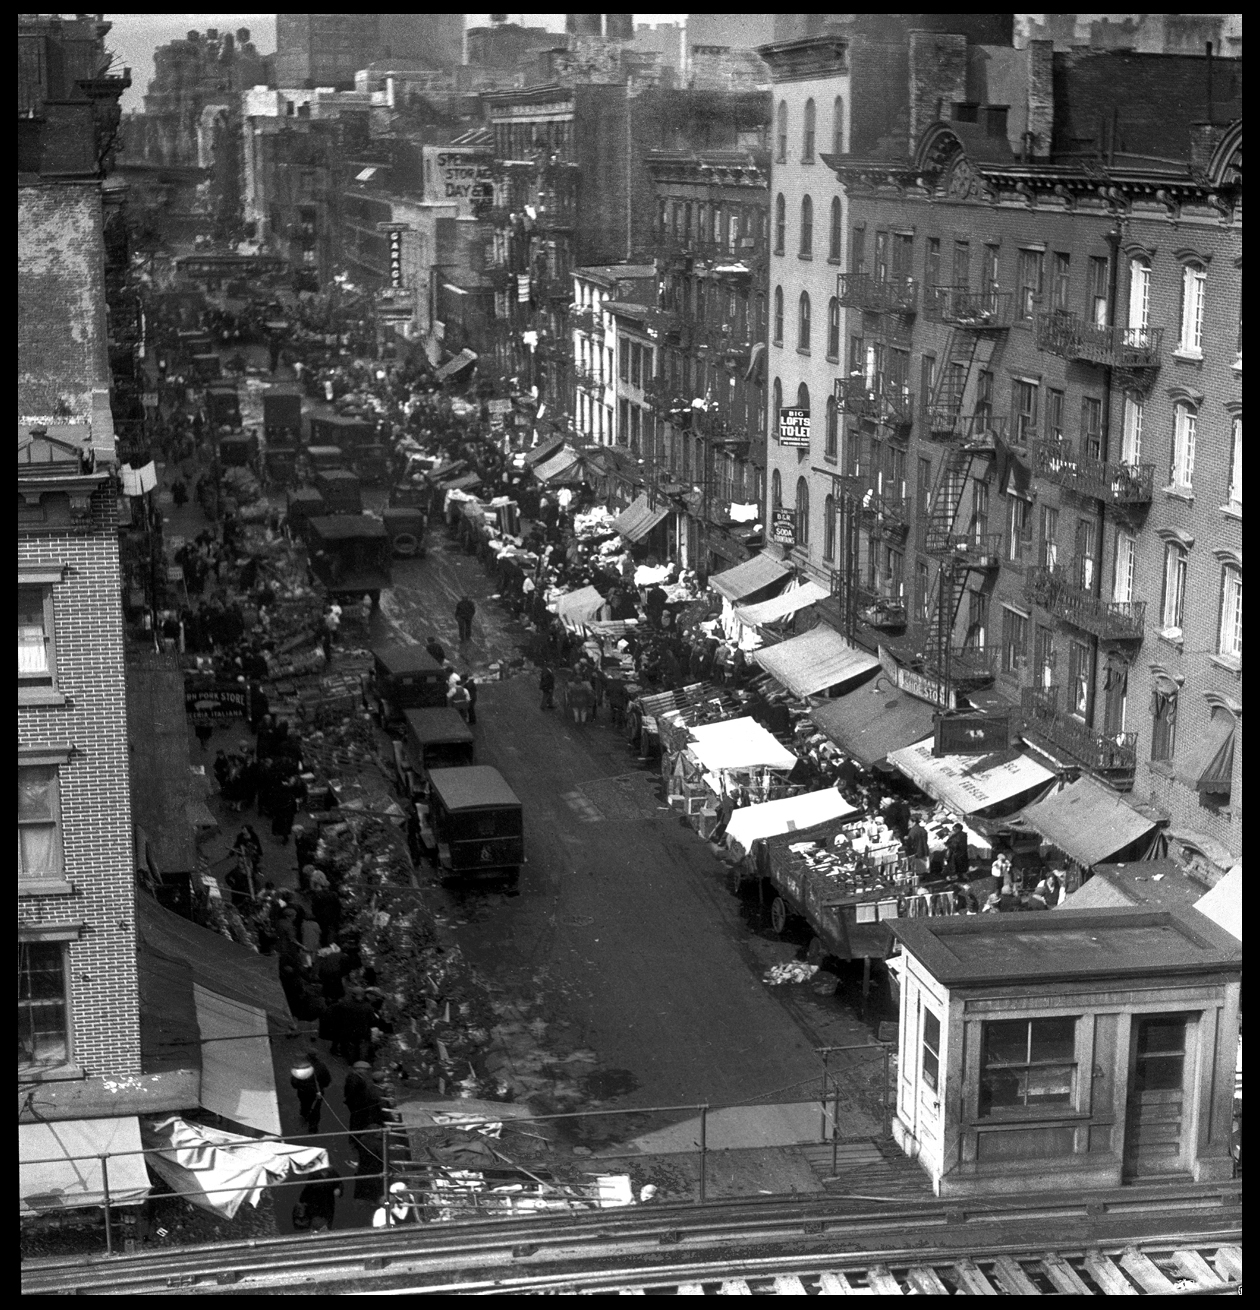 Lower East Side of Manhattan c.1928 from the original 4x5 negative